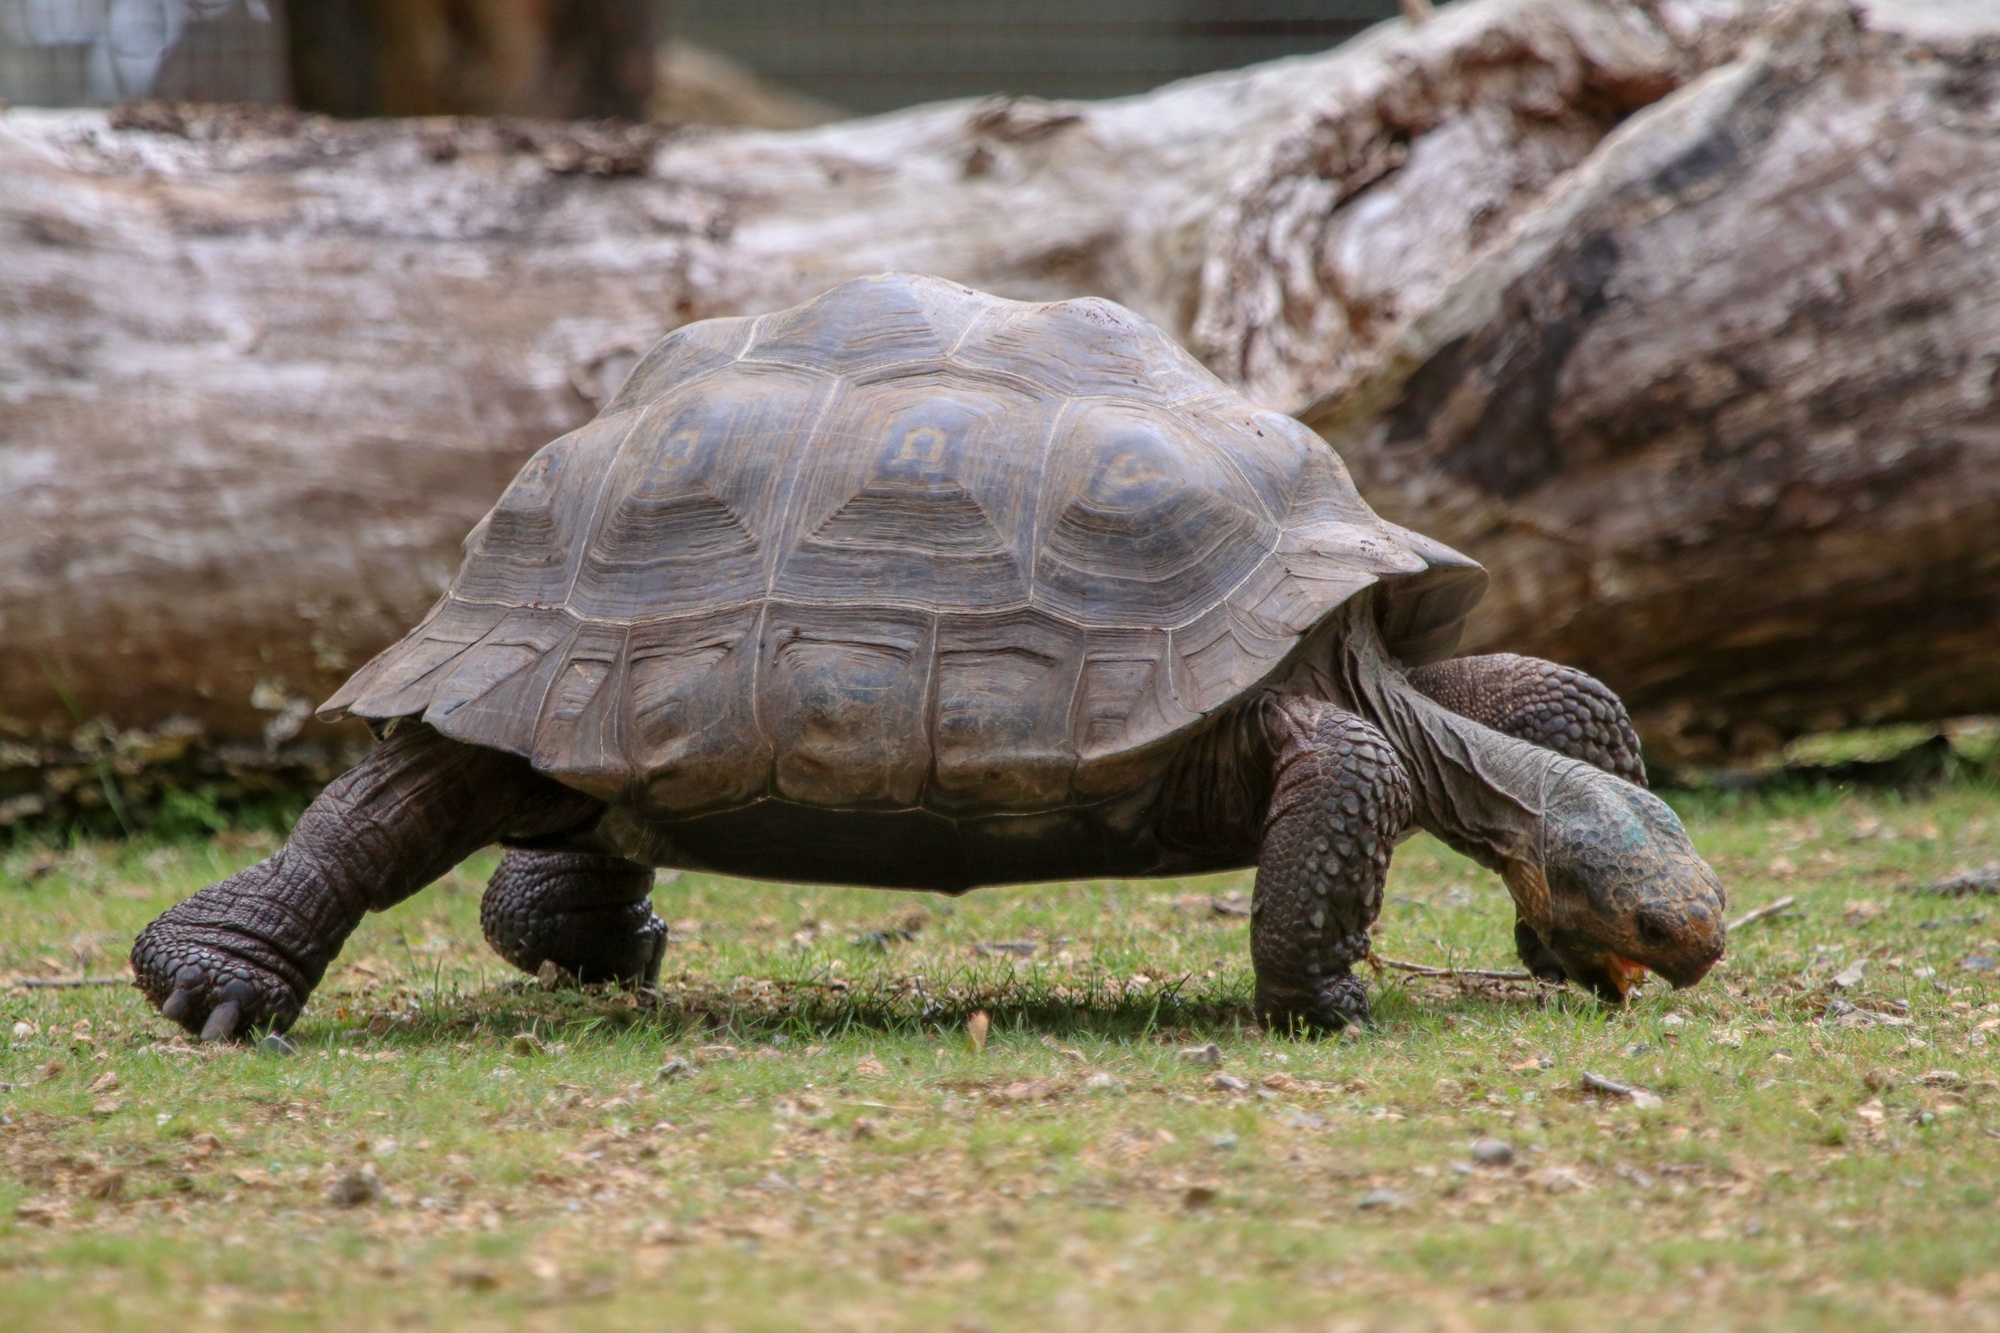 Galápagos tortoise walking along grass and trying to eat